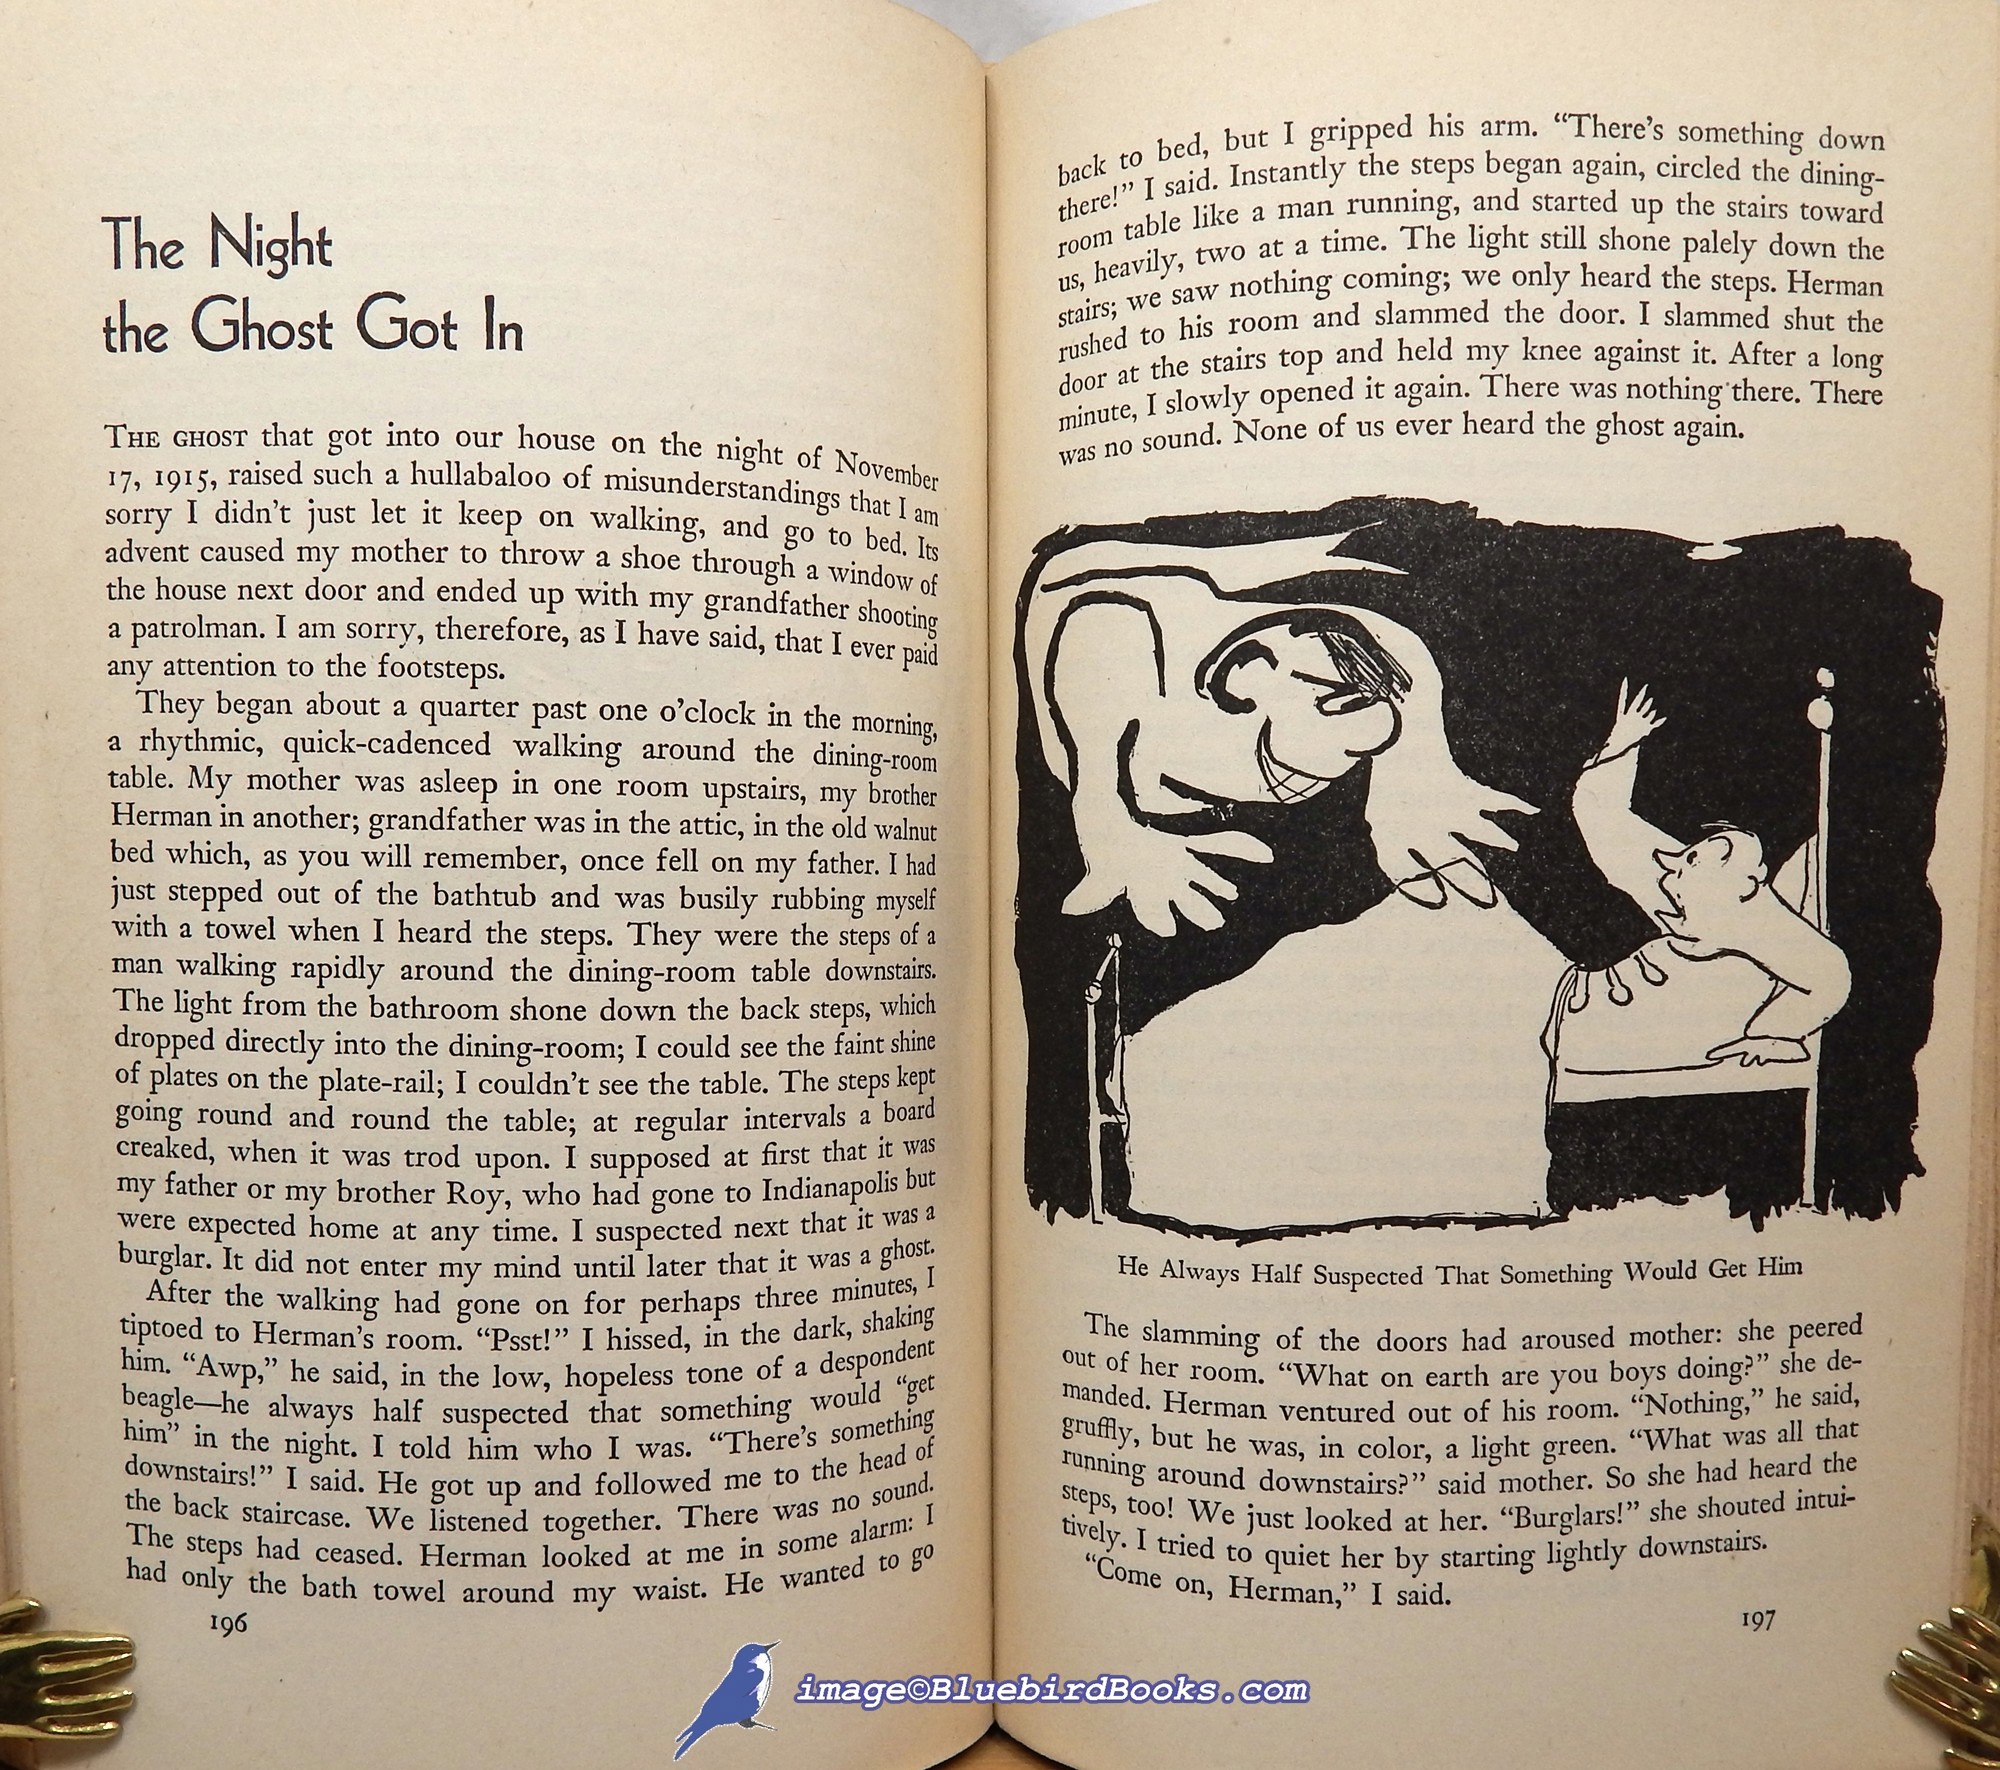 THURBER, JAMES (TEXT AND ILLUSTRATIONS)2 - The Thurber Carnival